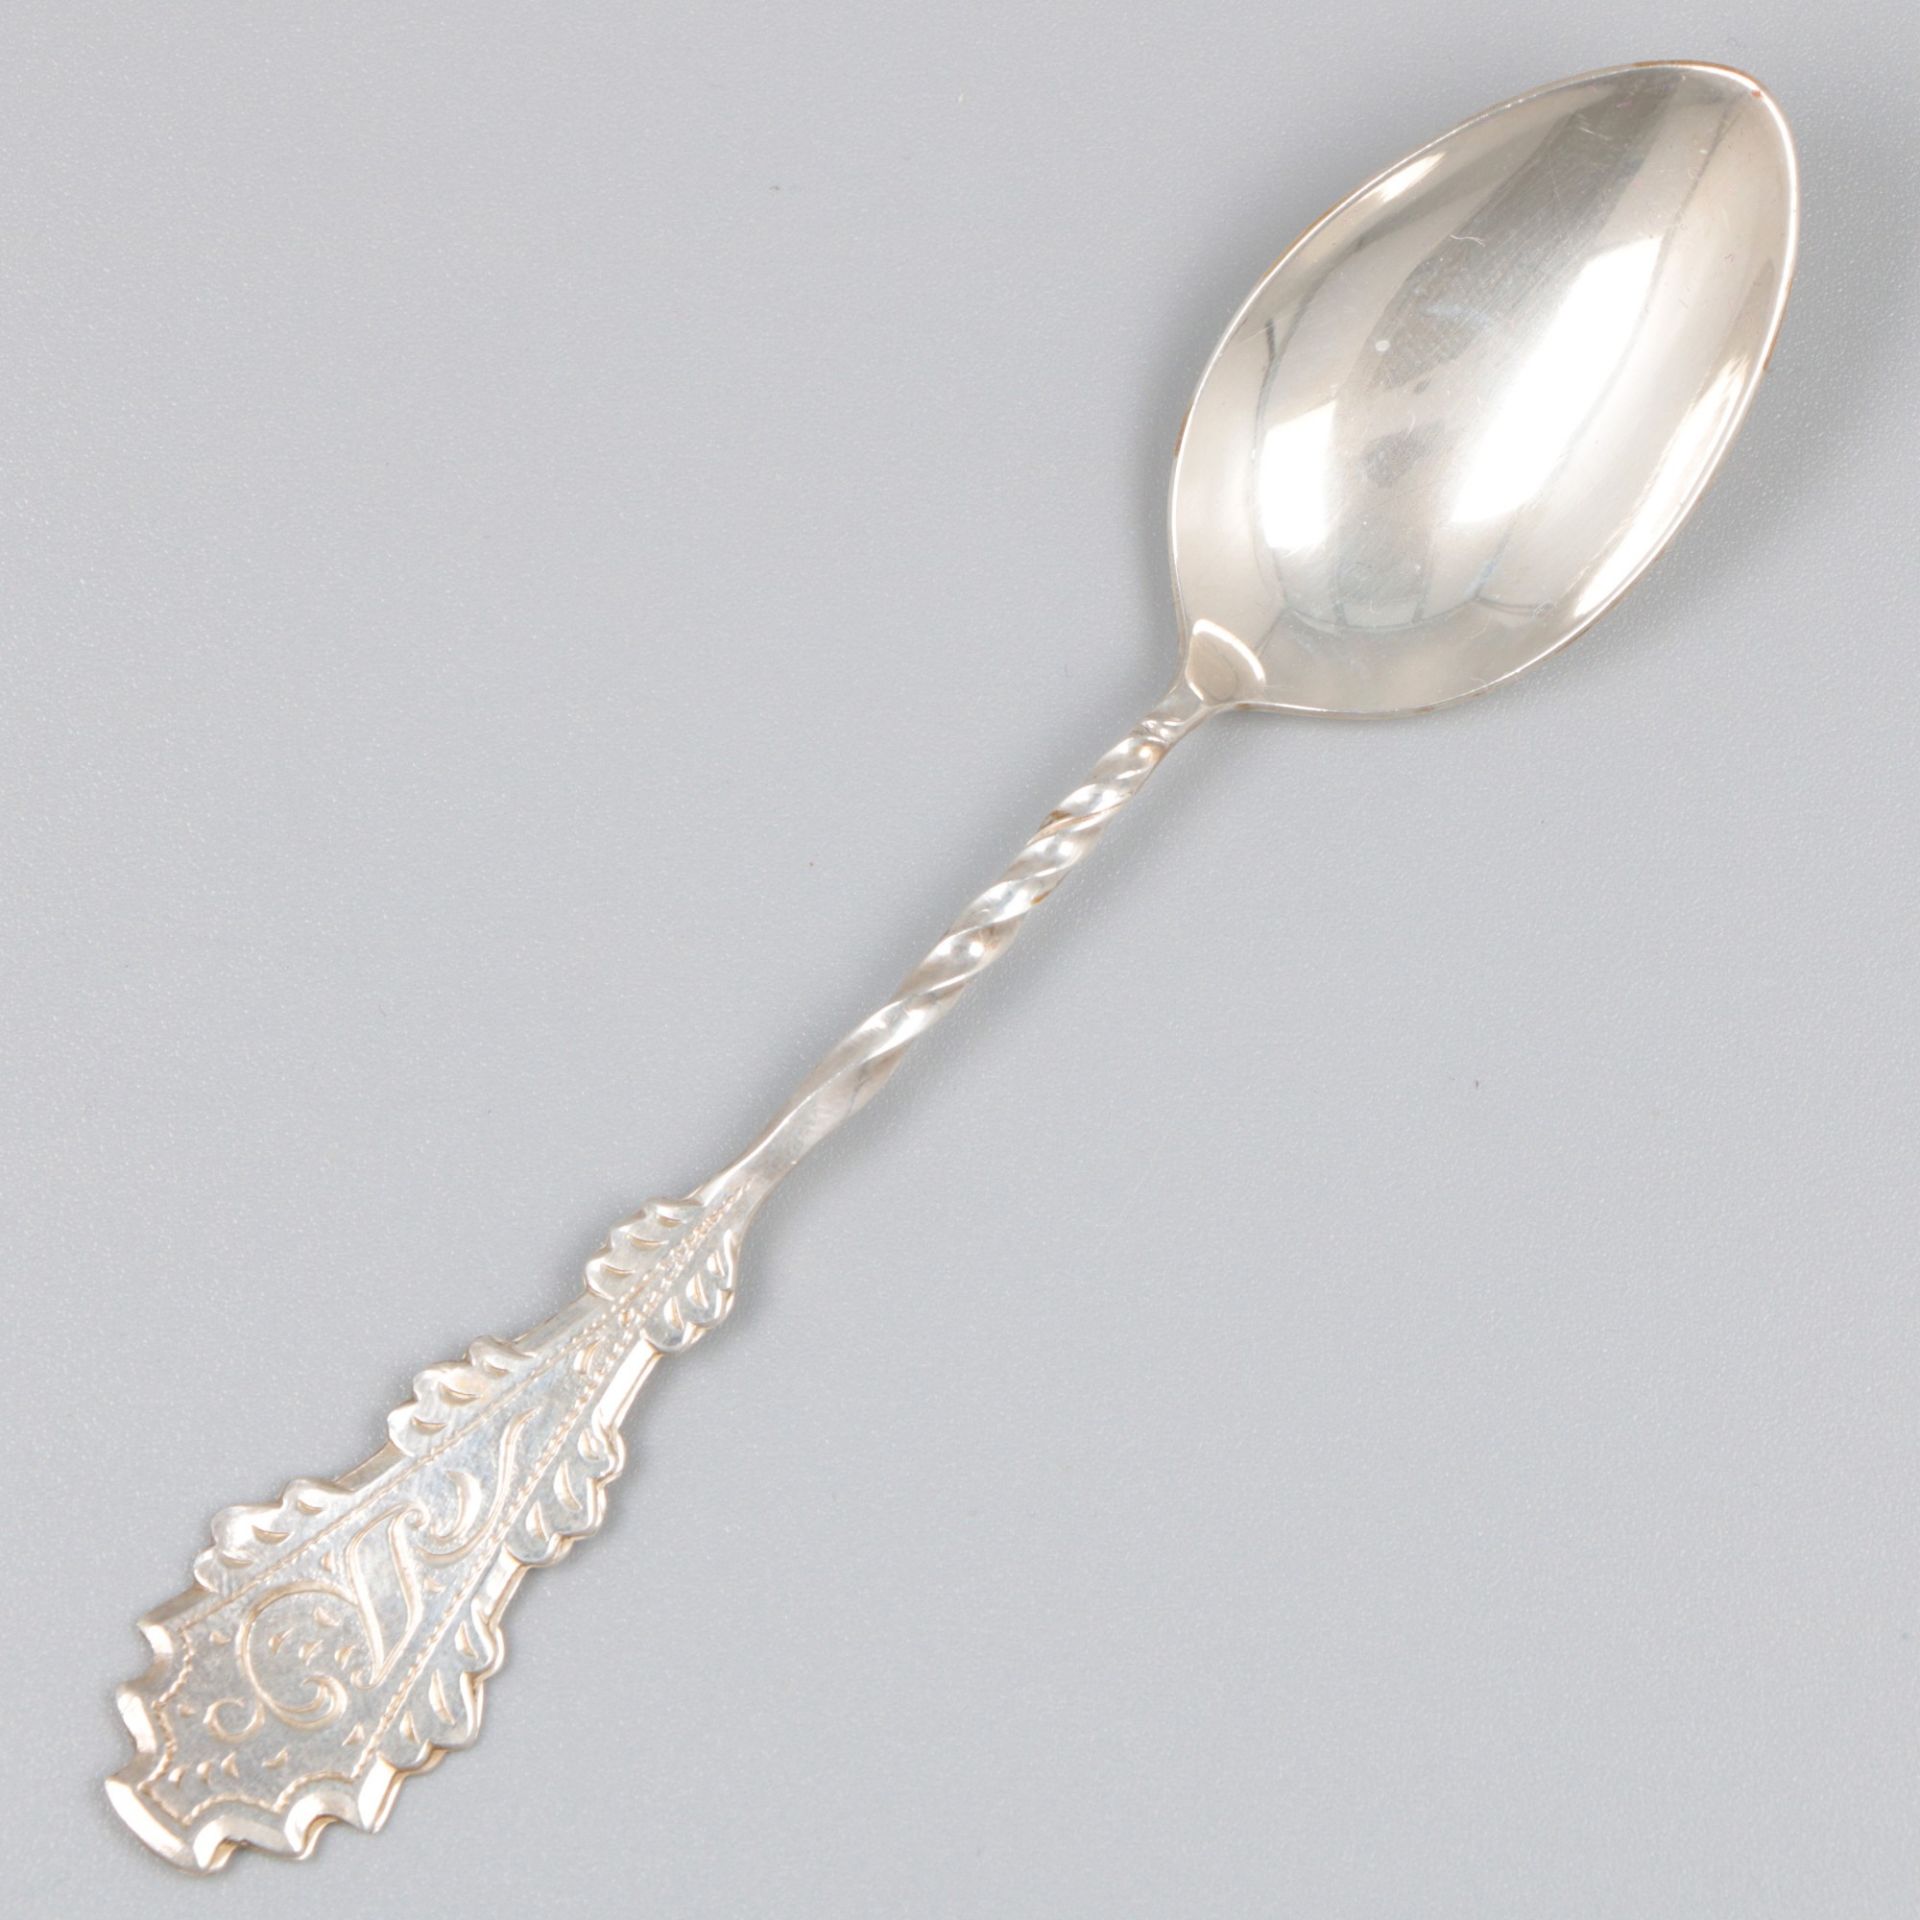 12-piece set of coffee / teaspoons silver. - Image 2 of 6